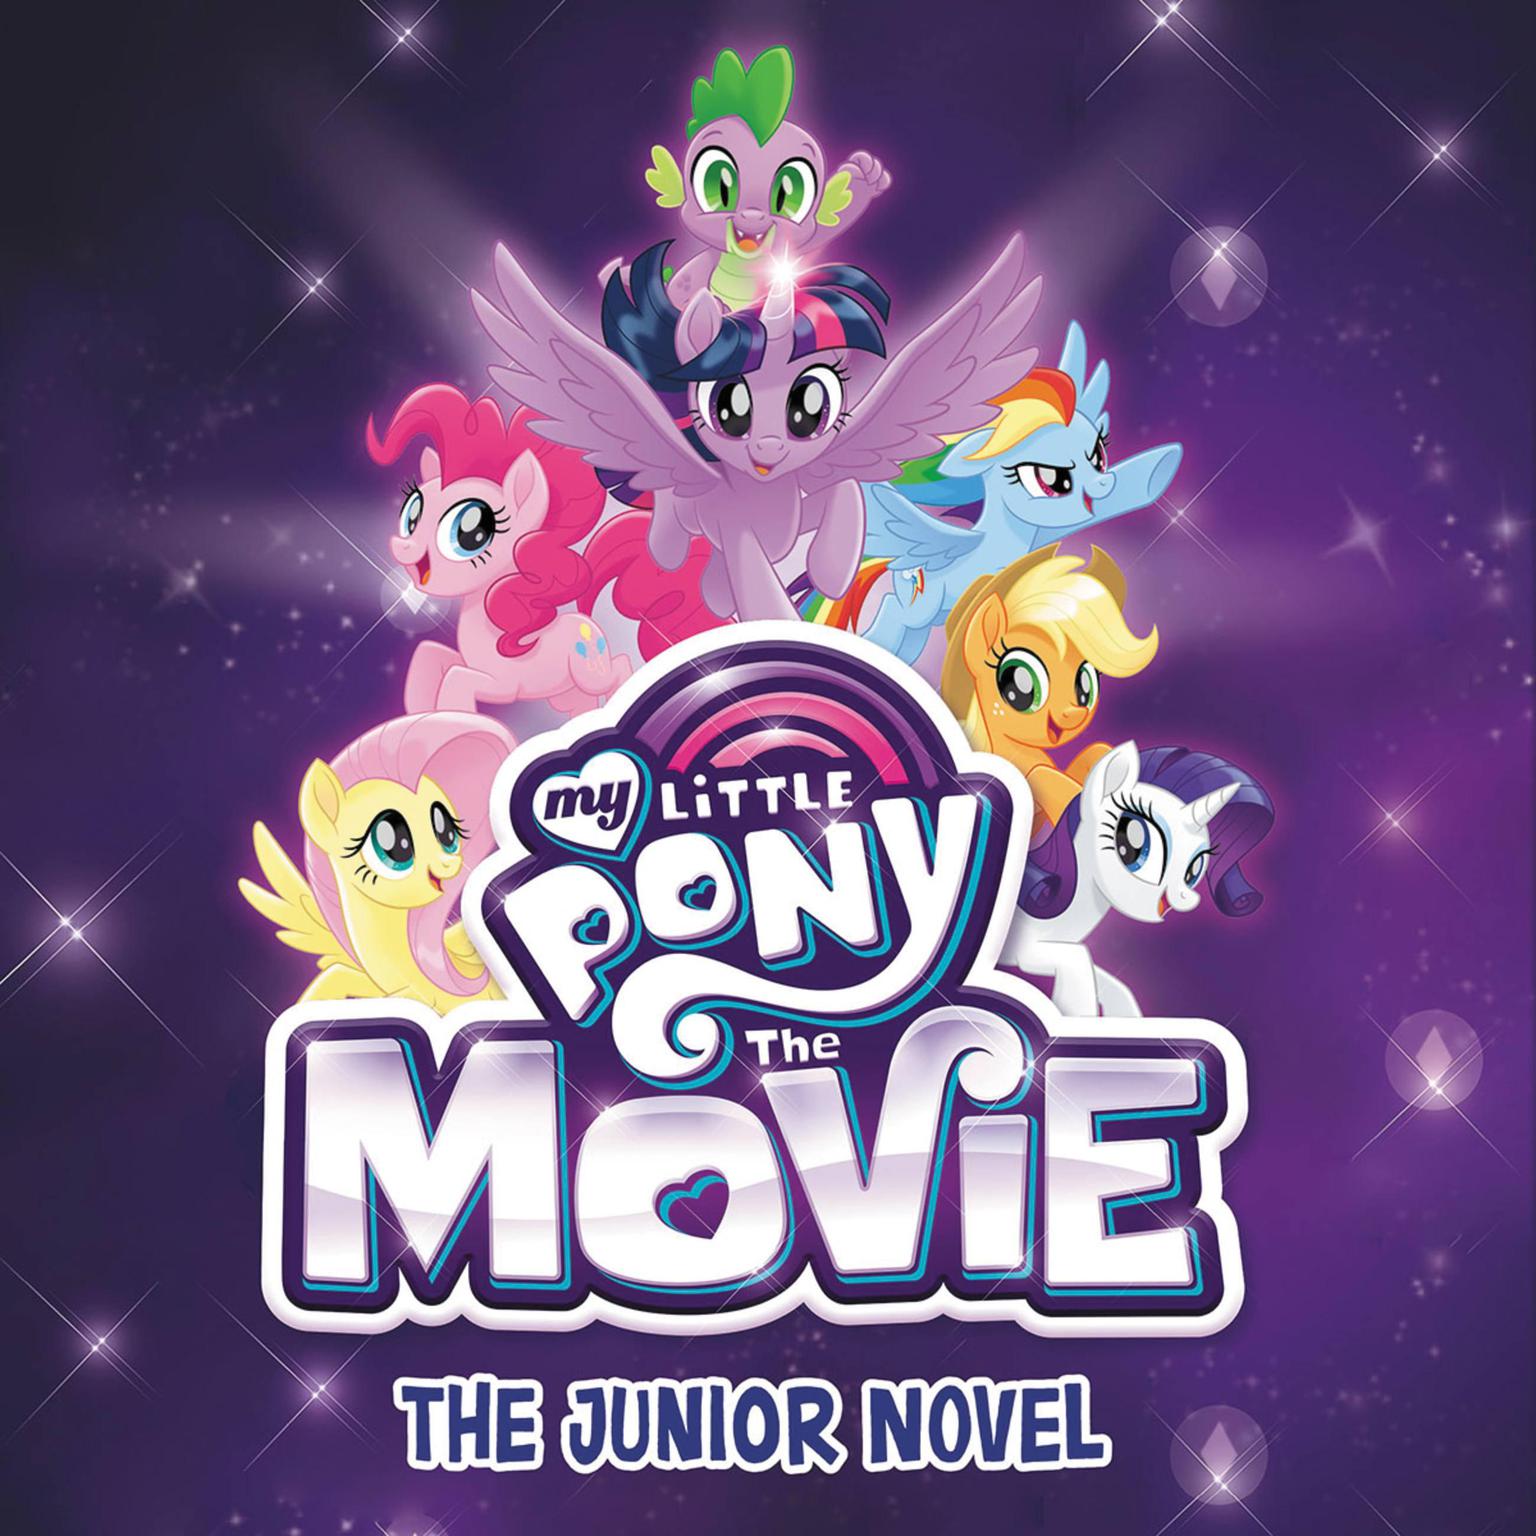 My Little Pony: The Movie: The Junior Novel Audiobook, by G. M. Berrow